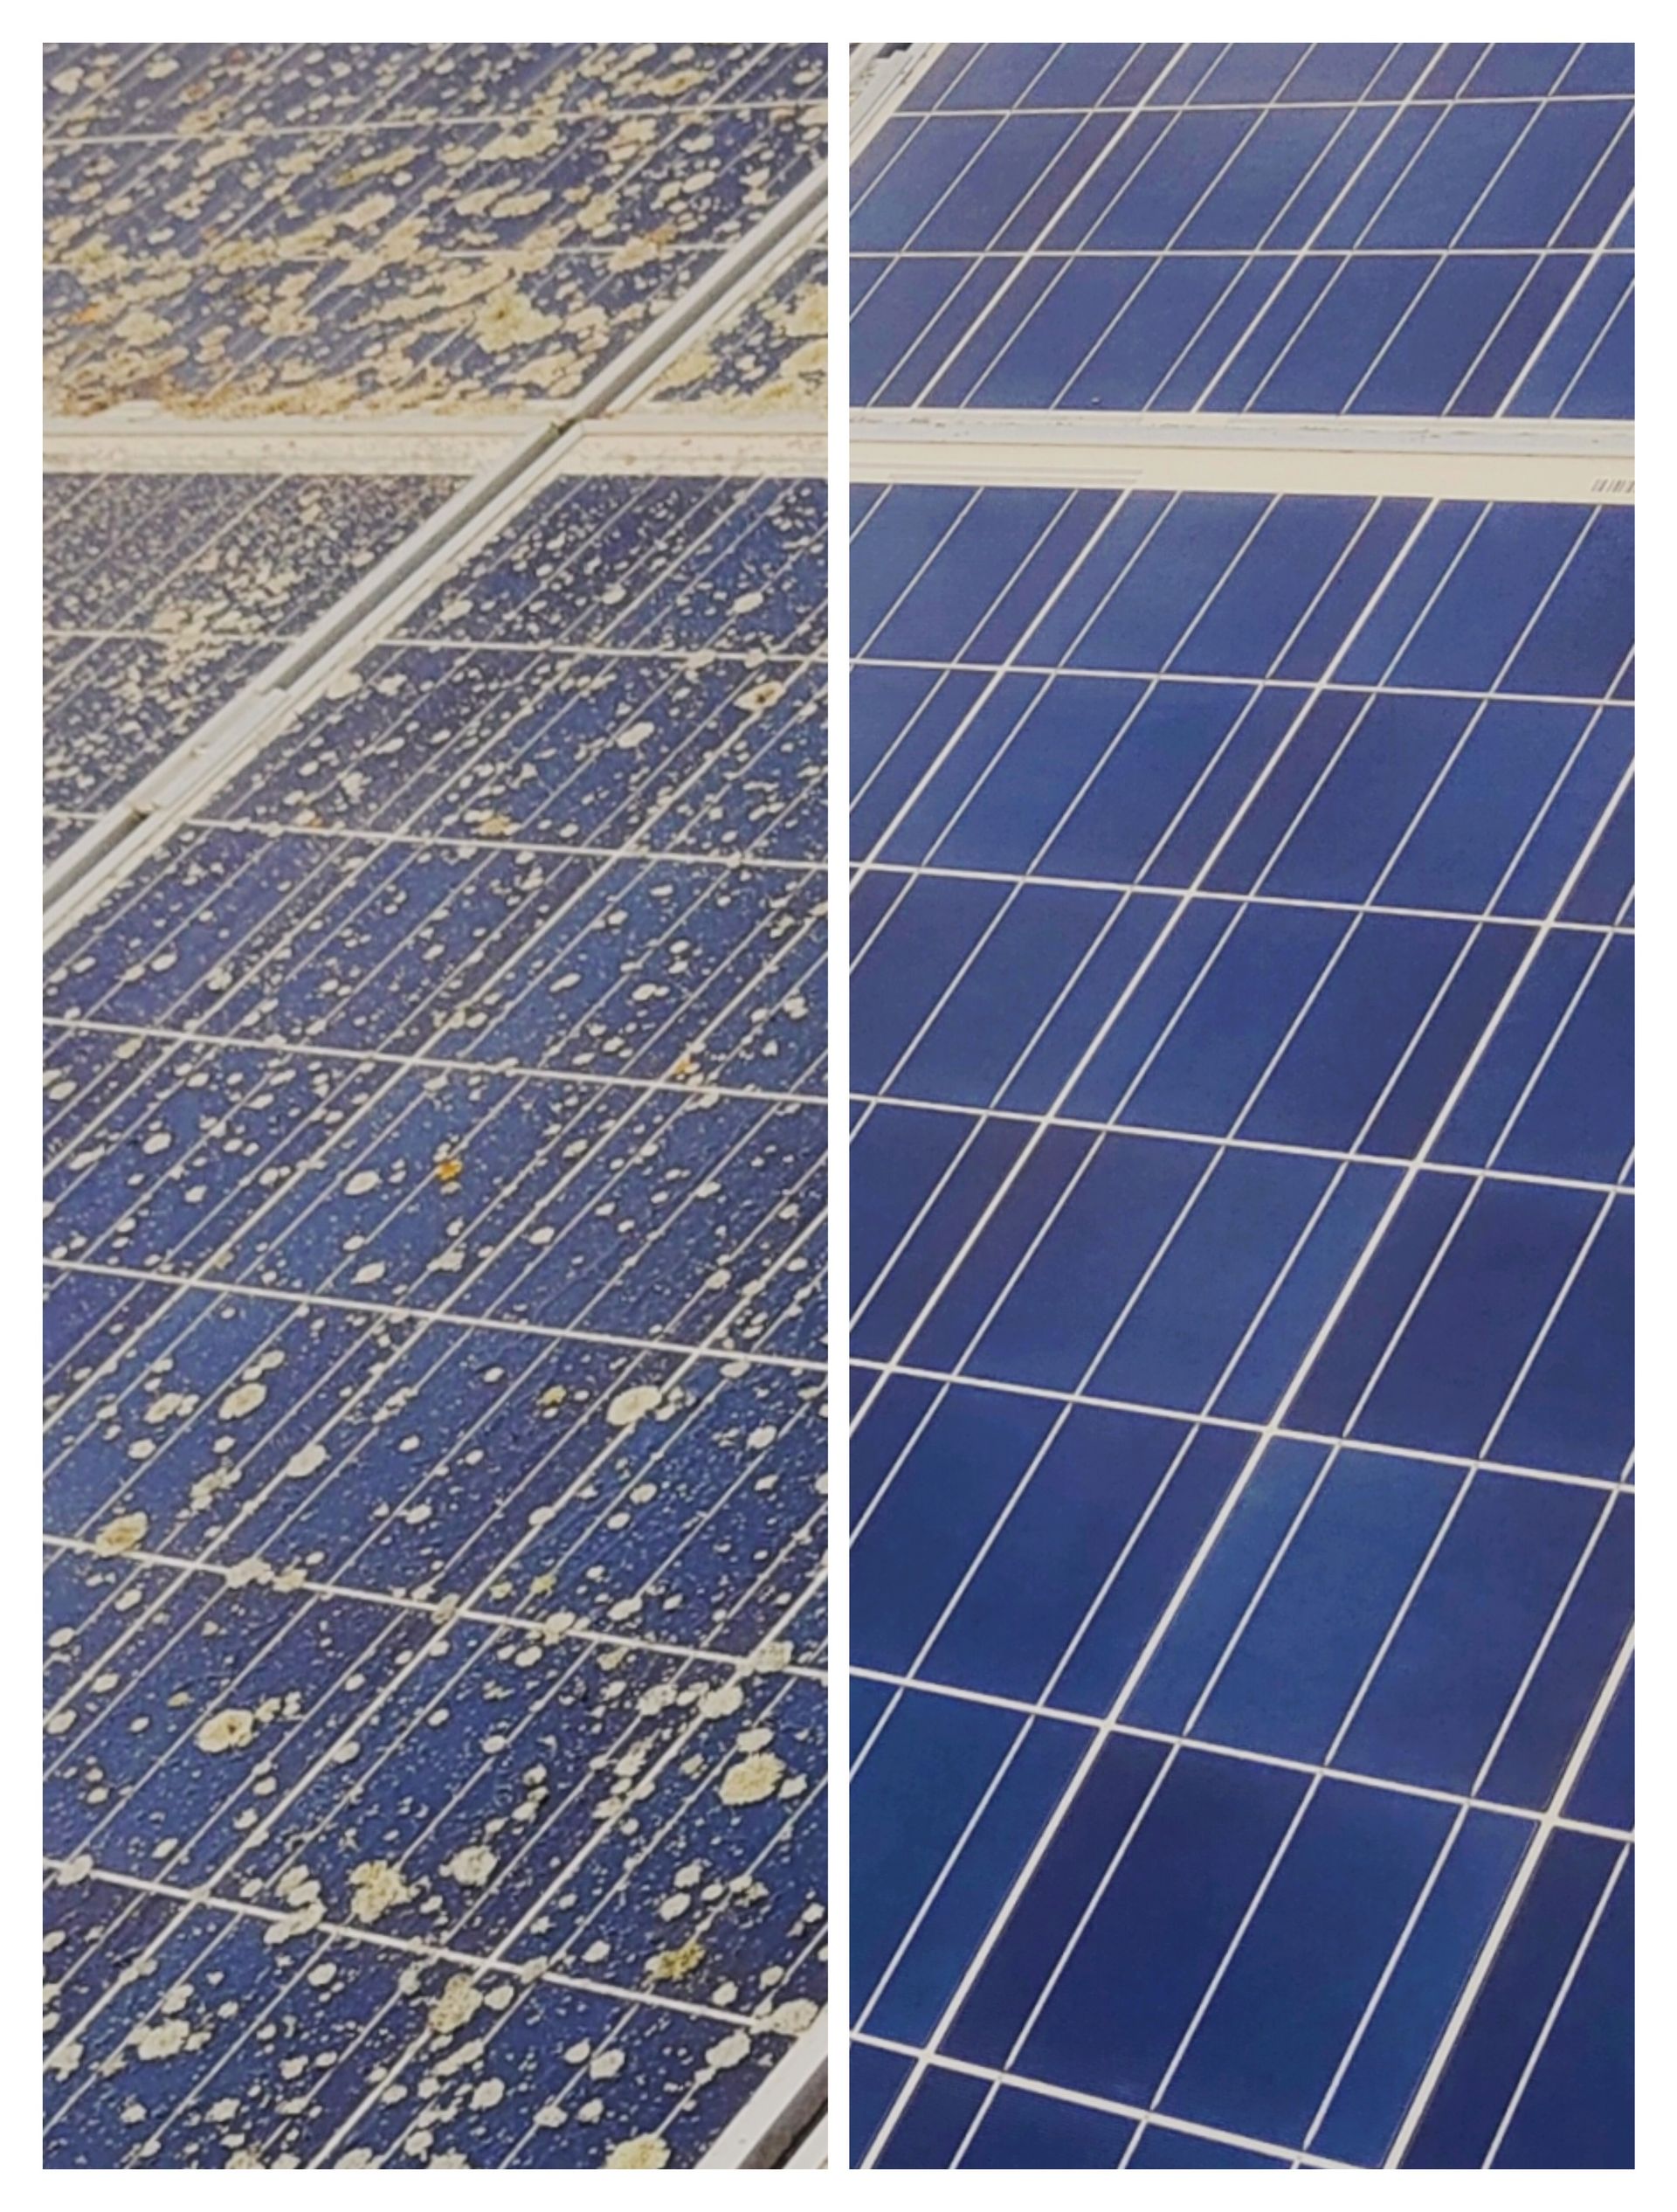 Solar panel before and after